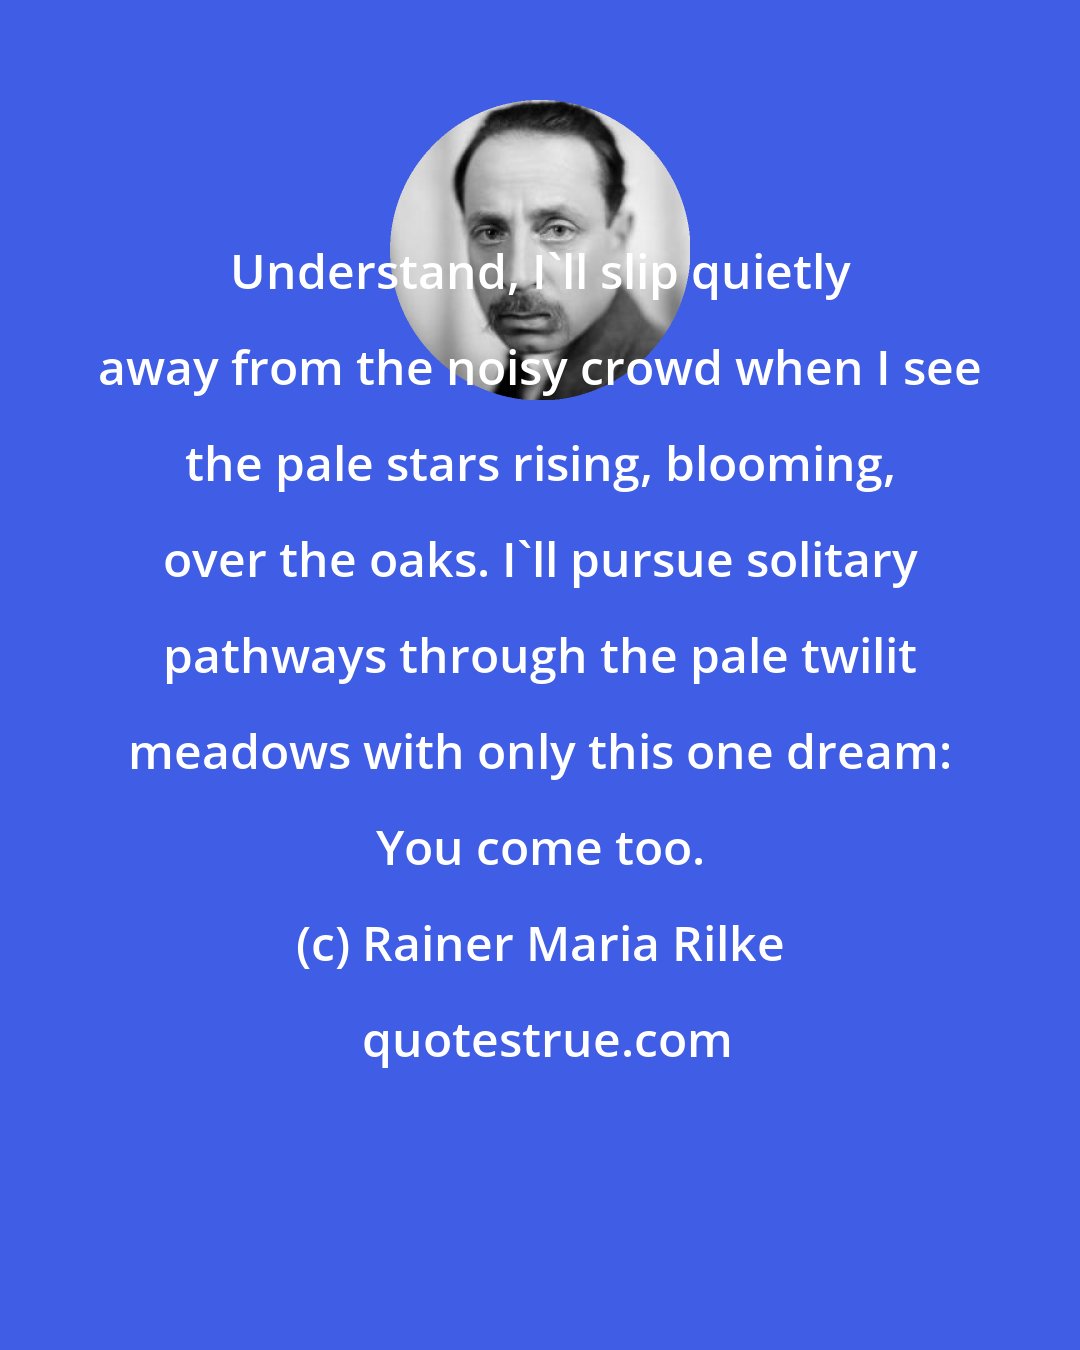 Rainer Maria Rilke: Understand, I'll slip quietly away from the noisy crowd when I see the pale stars rising, blooming, over the oaks. I'll pursue solitary pathways through the pale twilit meadows with only this one dream: You come too.